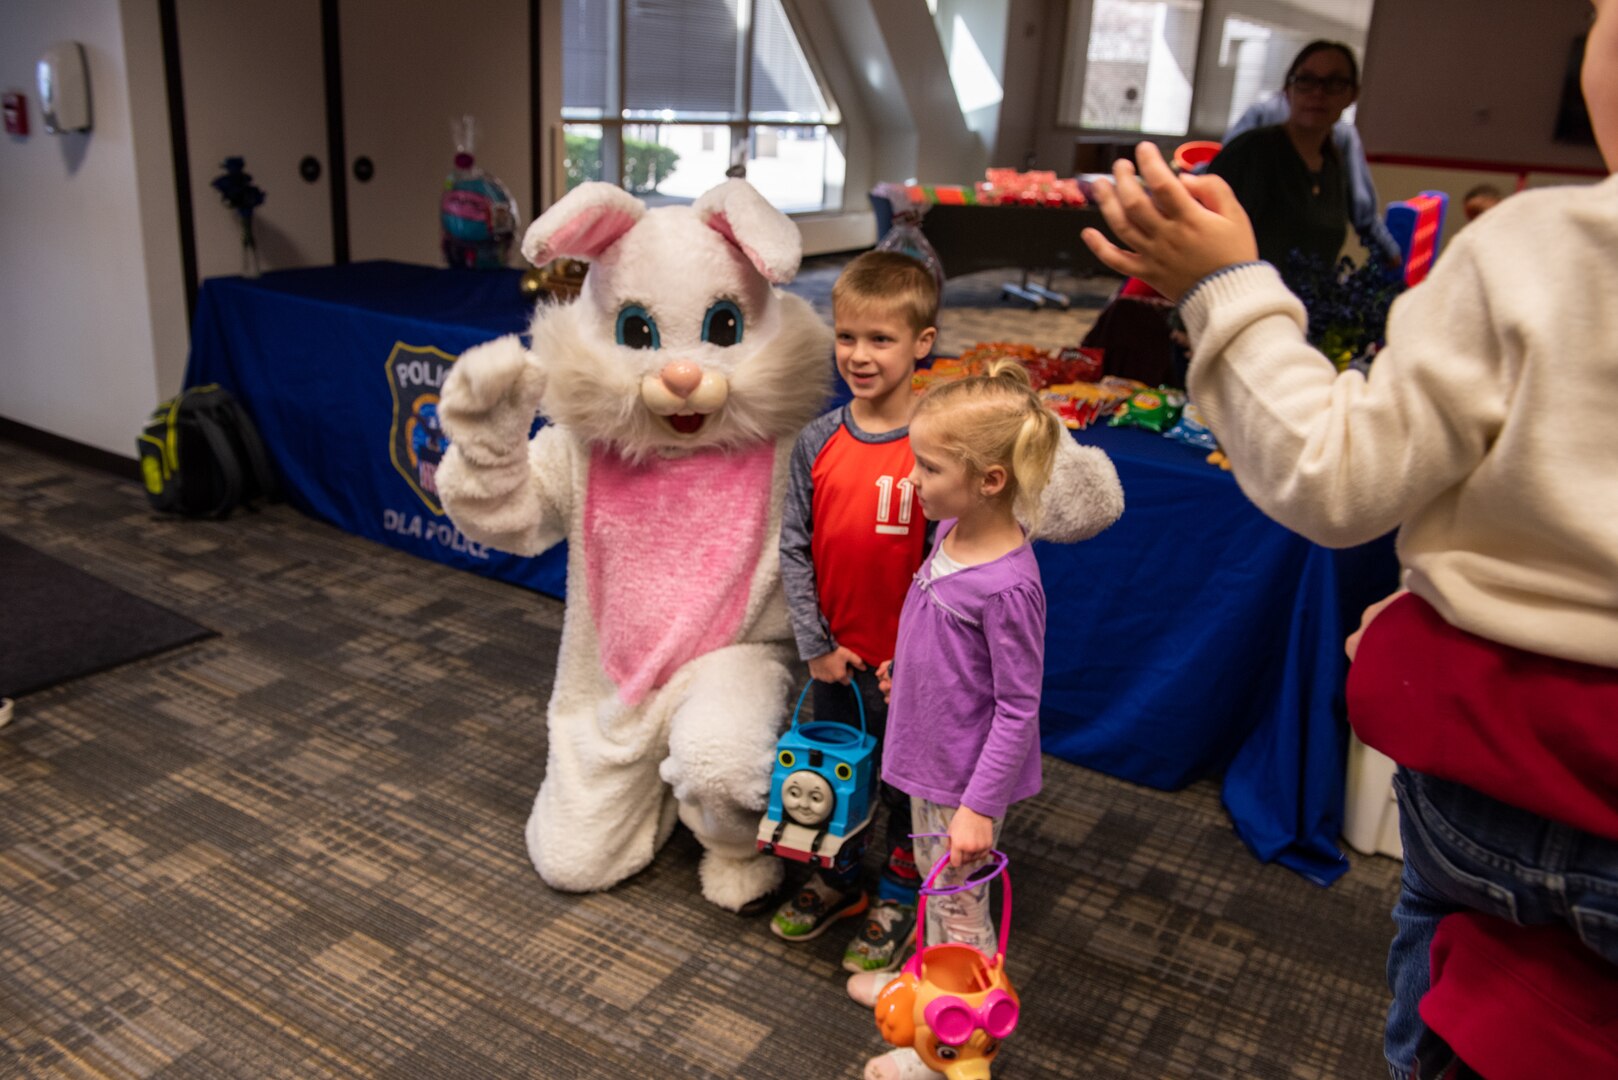 Children pose with a person dressed as the Easter Bunny who is kneeling to get down to their vantage point for a photo.